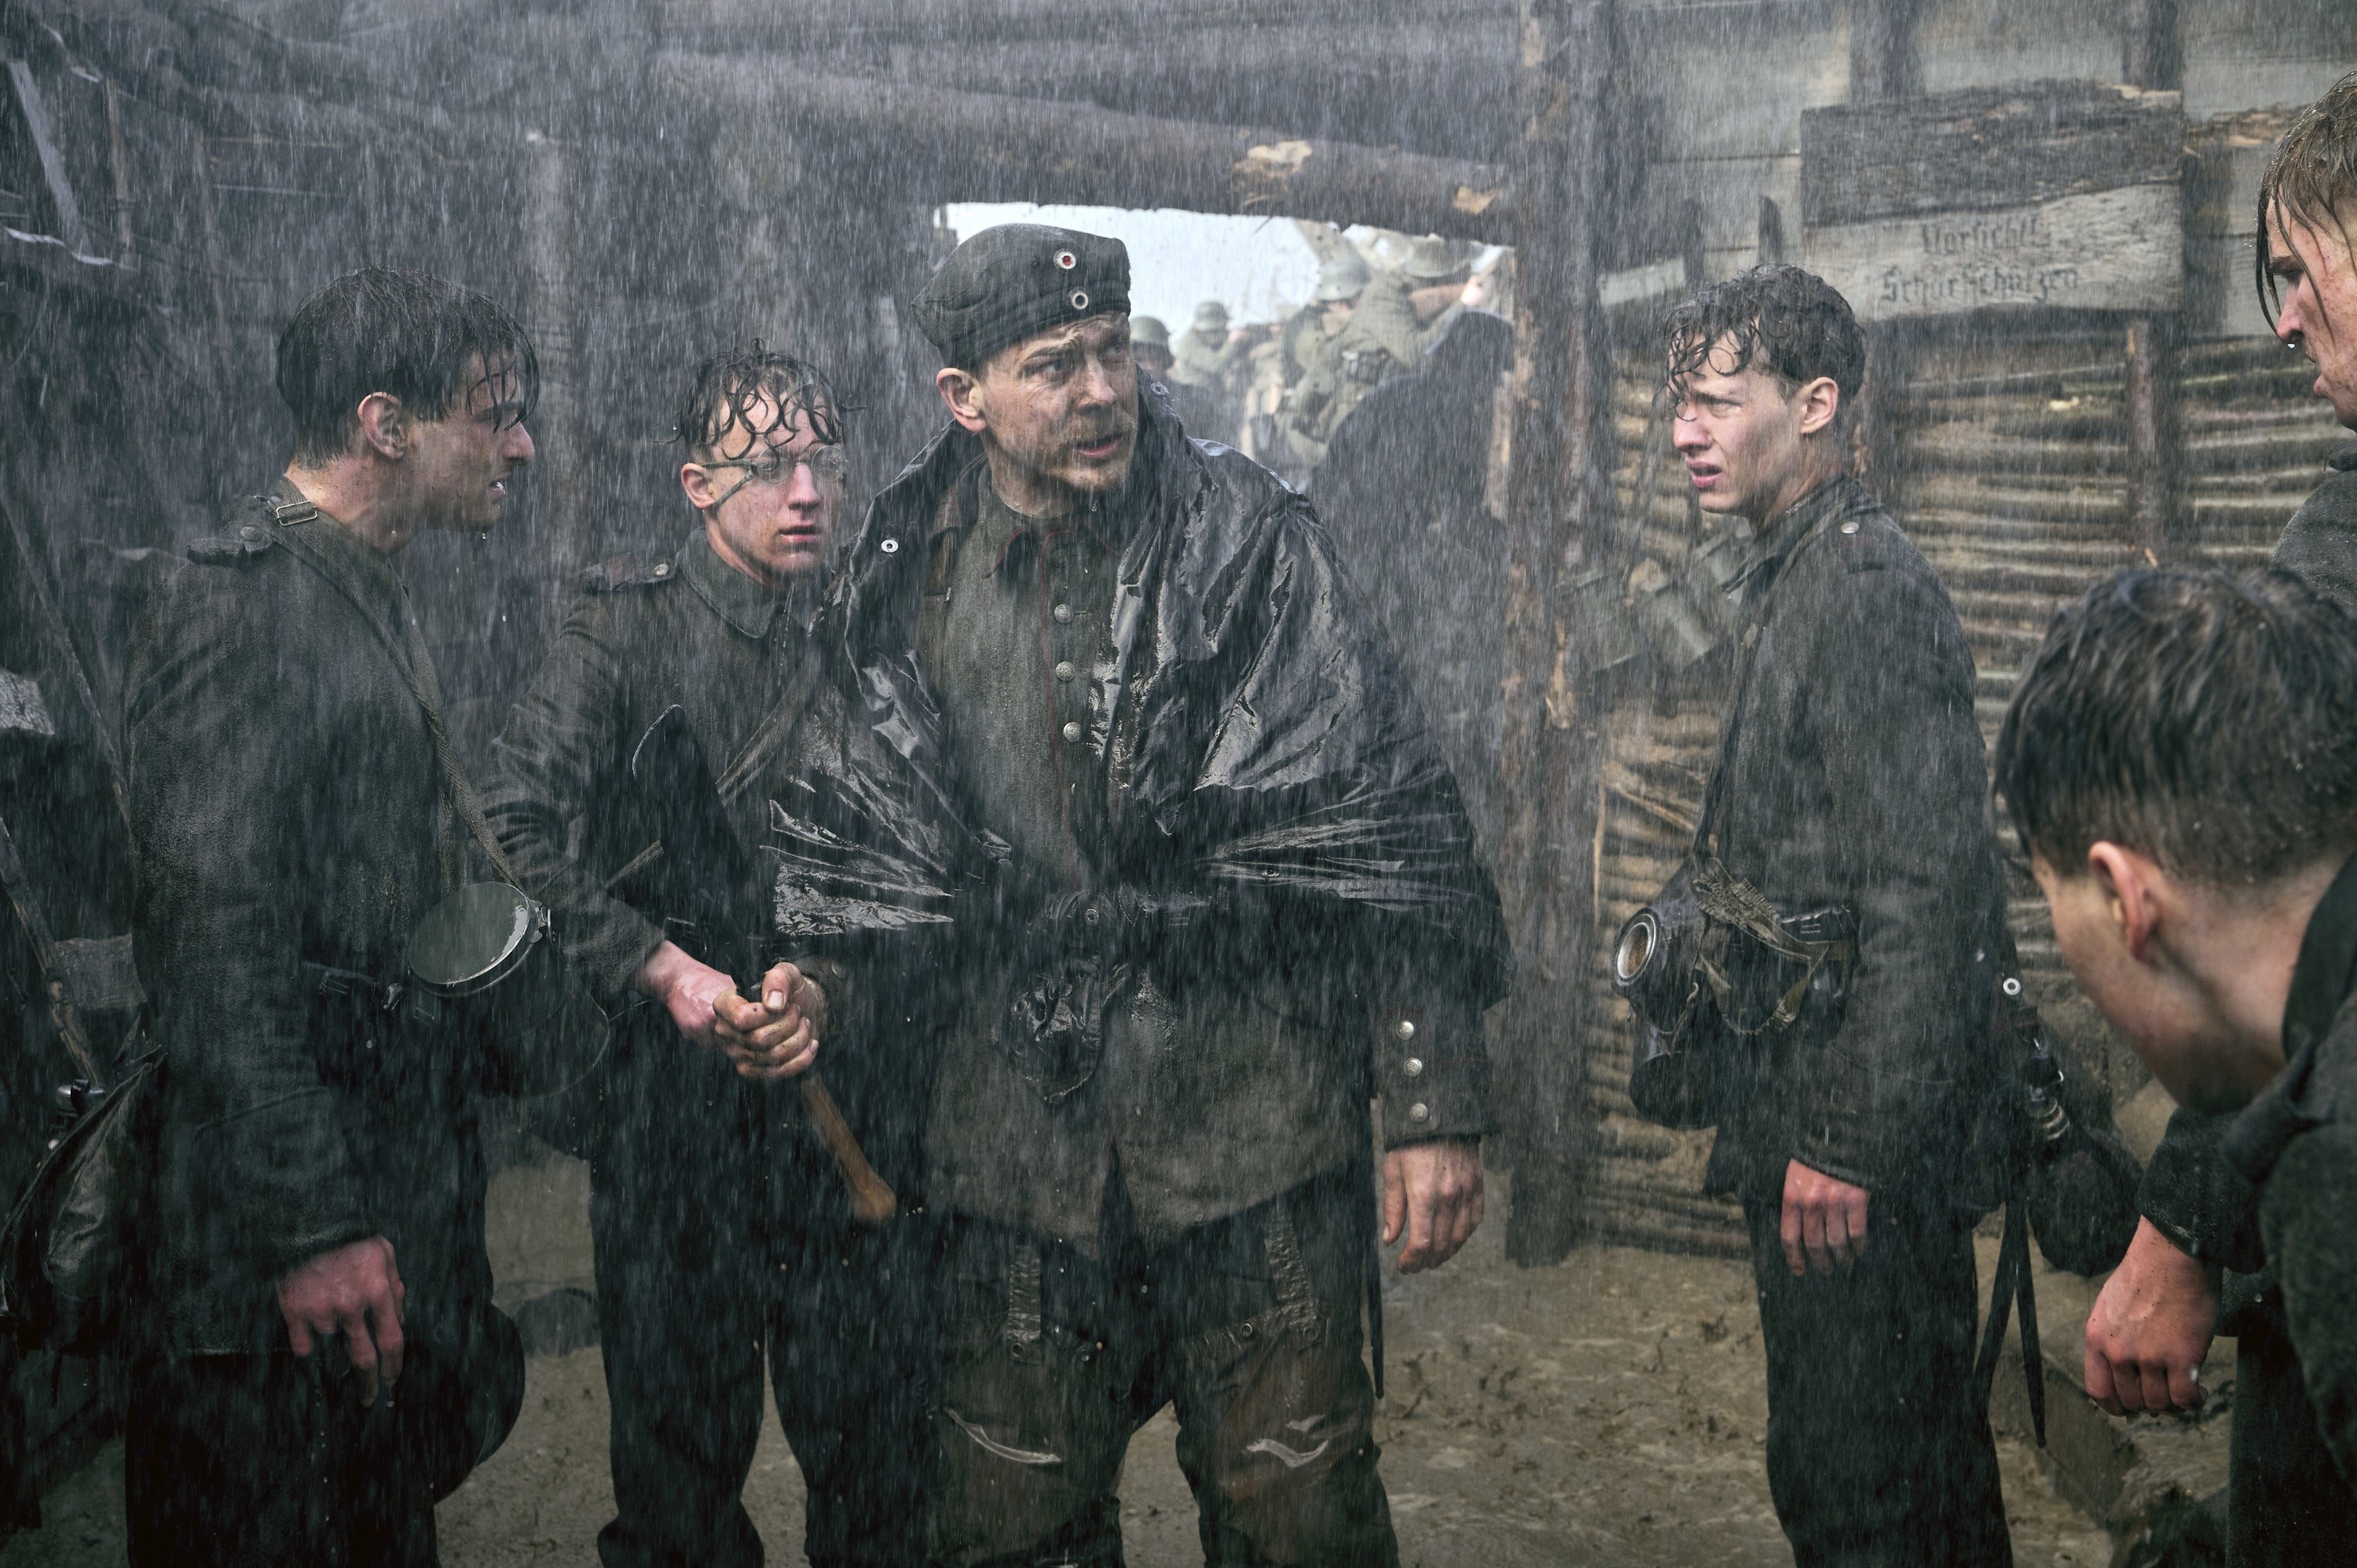 Several soldiers standing in barracks as it rains heavily in a scene from All Quiet on the Western Front